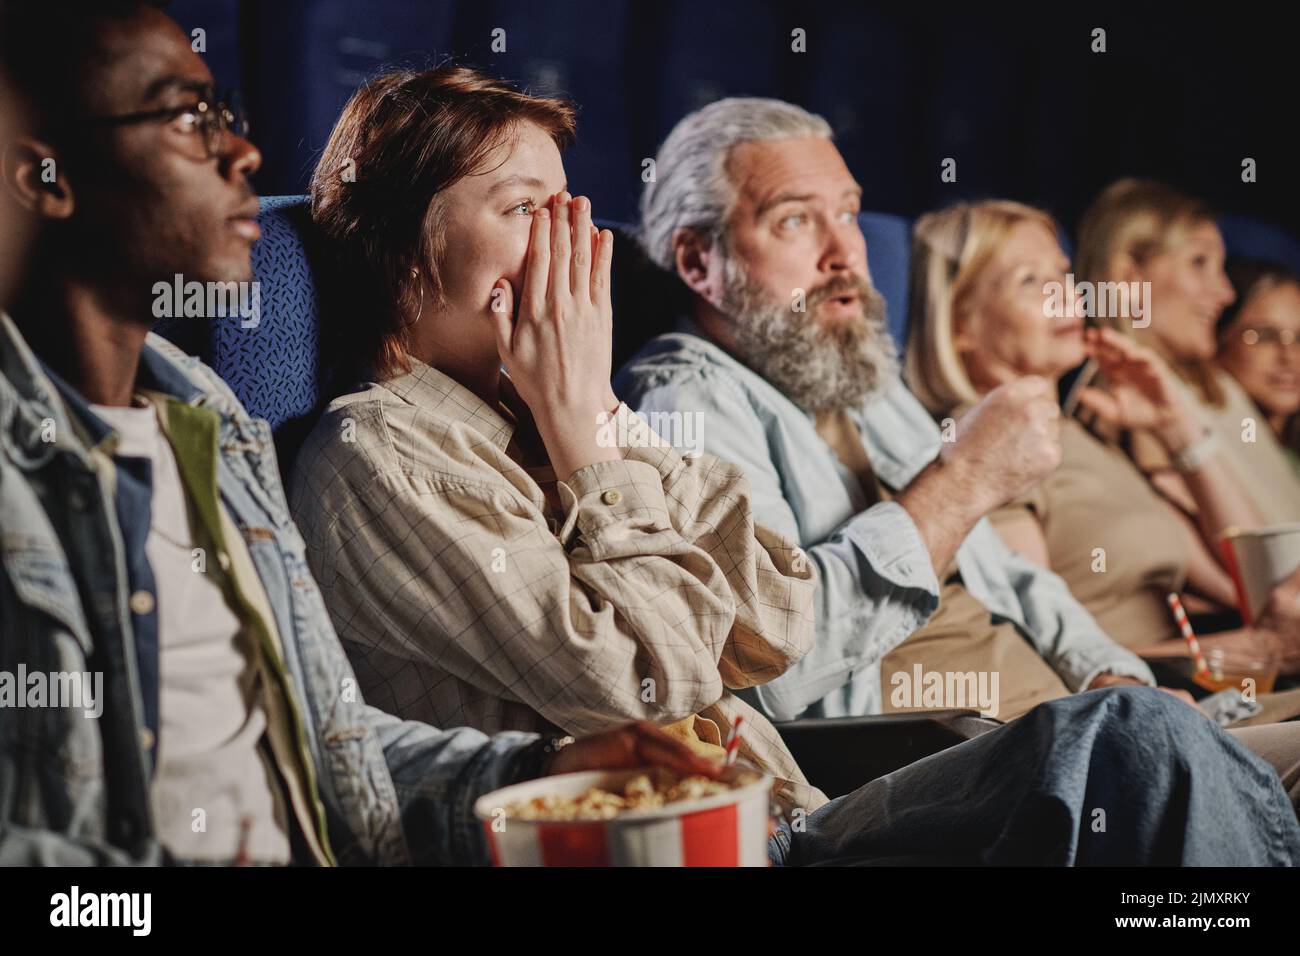 Diverse group of people spending evening watching new movie at cinema reacting to scene Stock Photo